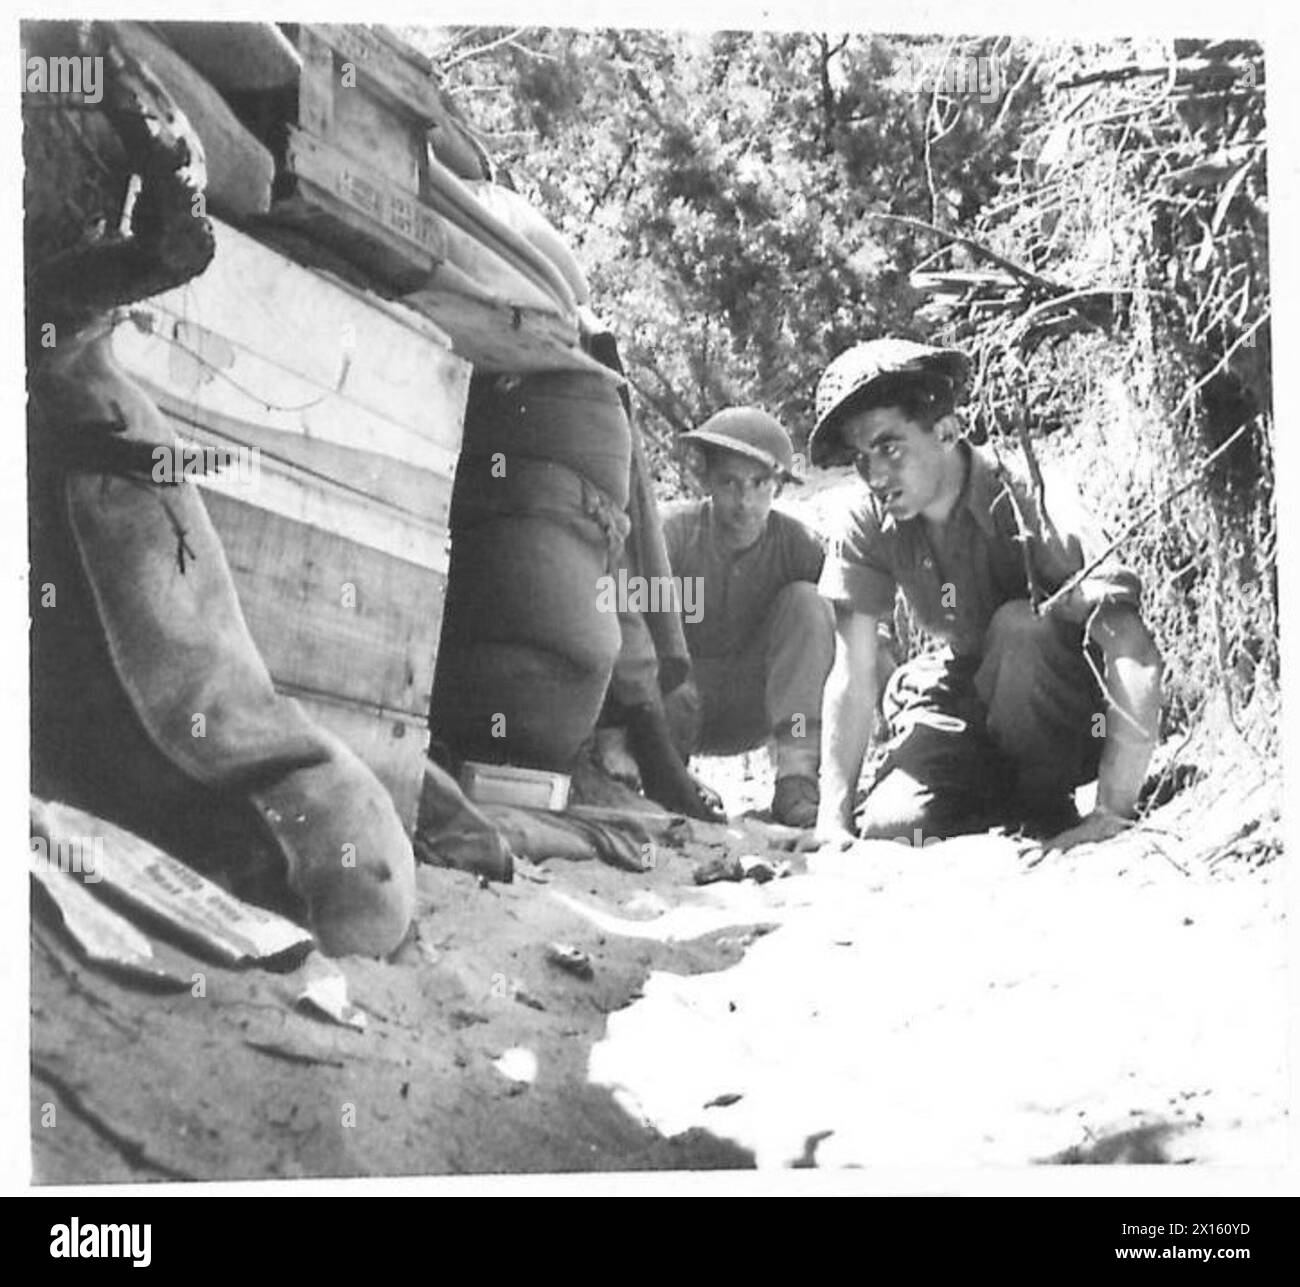 FIFTH ARMY - ANZIO BRIDGEHEAD (VARIOUS) - Half-way along the communication trench to the 131 Section O.P. is a small dugout occupied day and night by reliefs. Two of the reliefs are seen returning from their midday meal. They are:- Pte. H. Welch (nearest camera) of 21 Spencer Street, St.Hamos End, Northampton, and Pte. B. Stapenhurst of 81, Hampstead Way, London, N.W.11 British Army Stock Photo